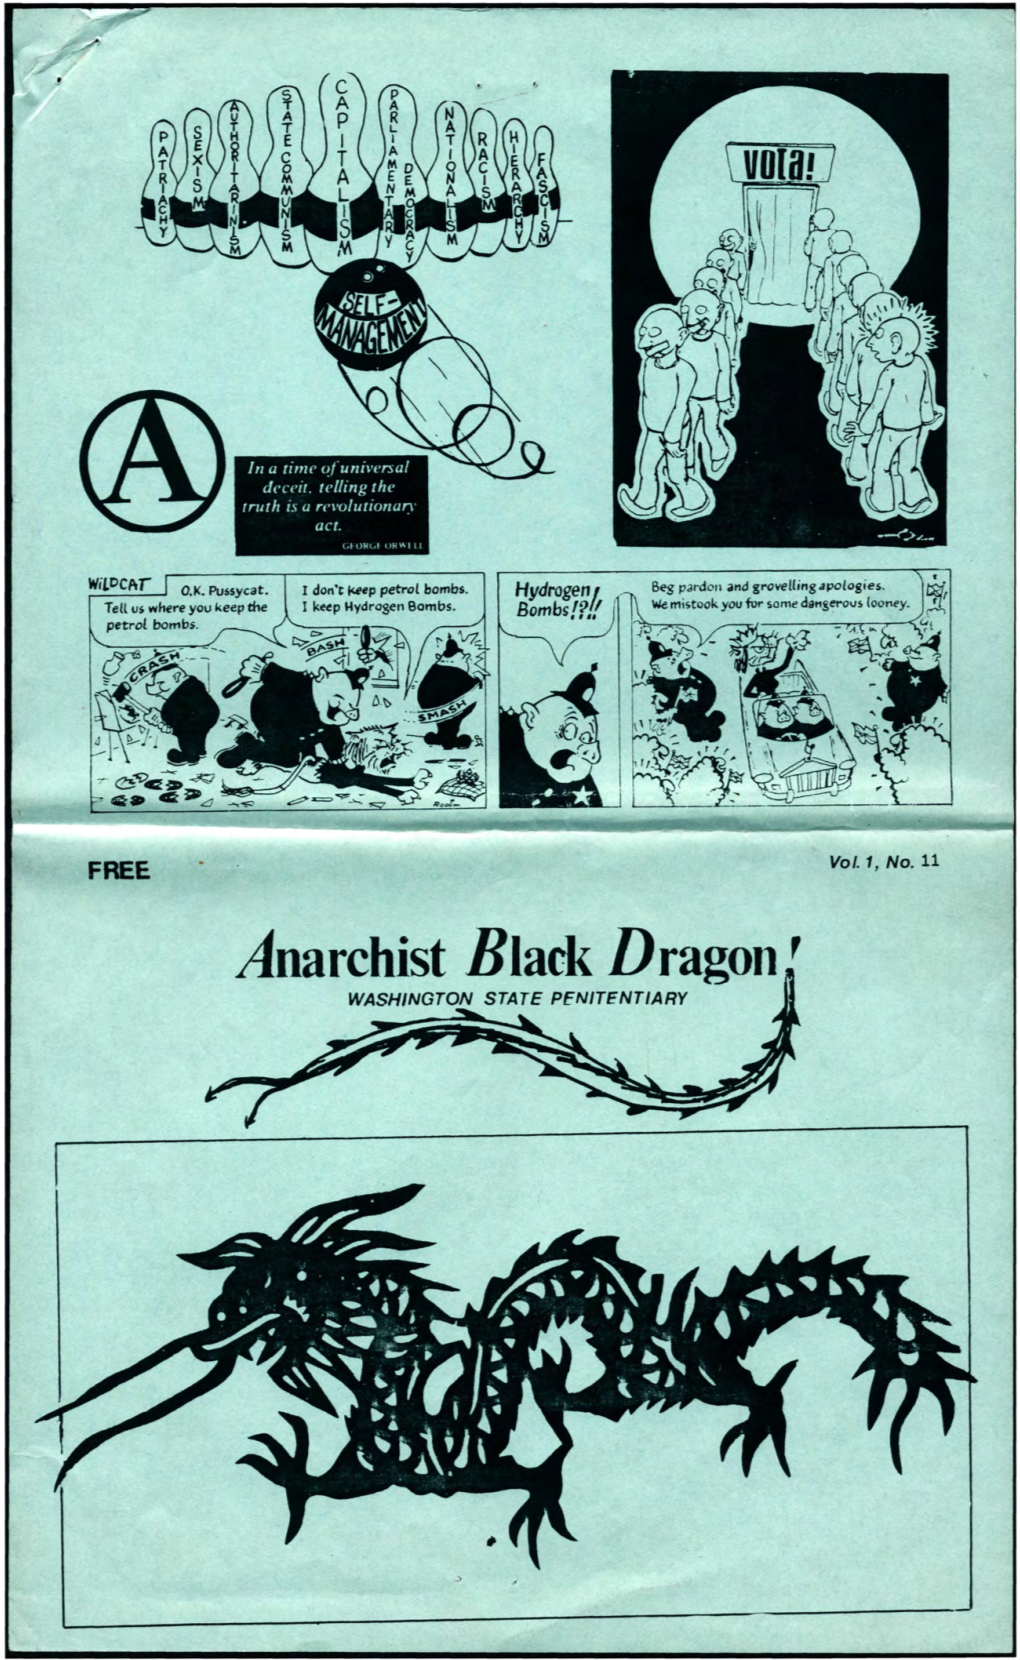 Anarchist Black Dragon' WASHINGTON STATE PENITENTIARY the Other Major Change Is Our Printer/Distributor